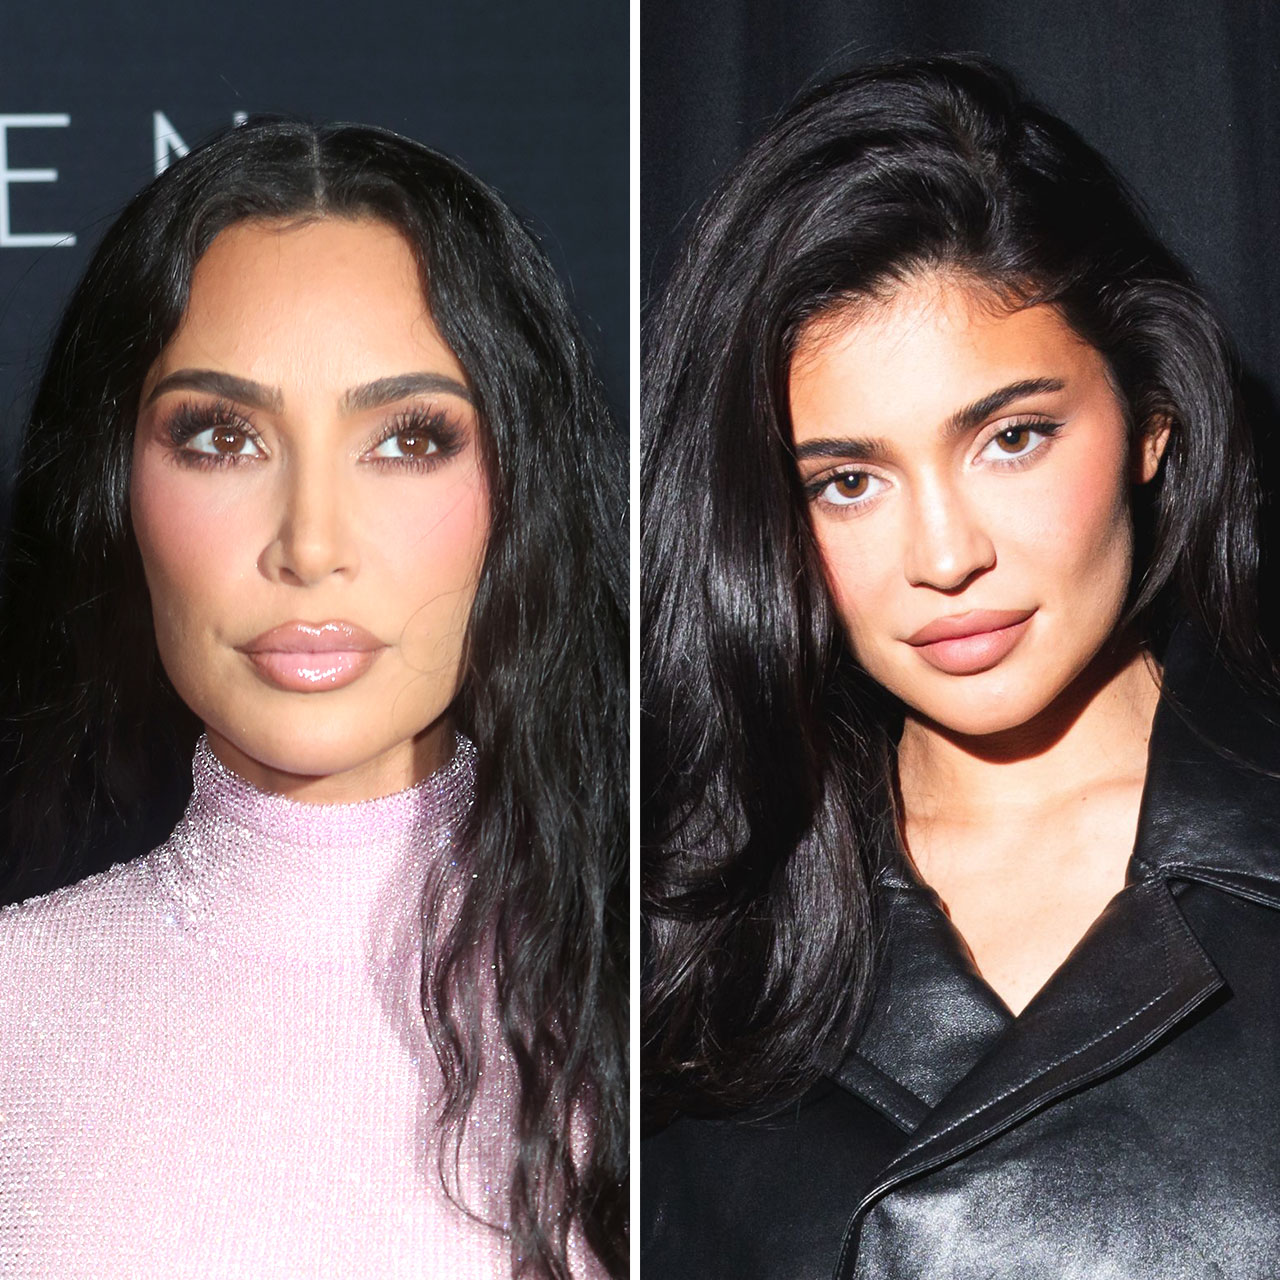 Kardashian fans praise Kim for looking 'healthier' with curves in